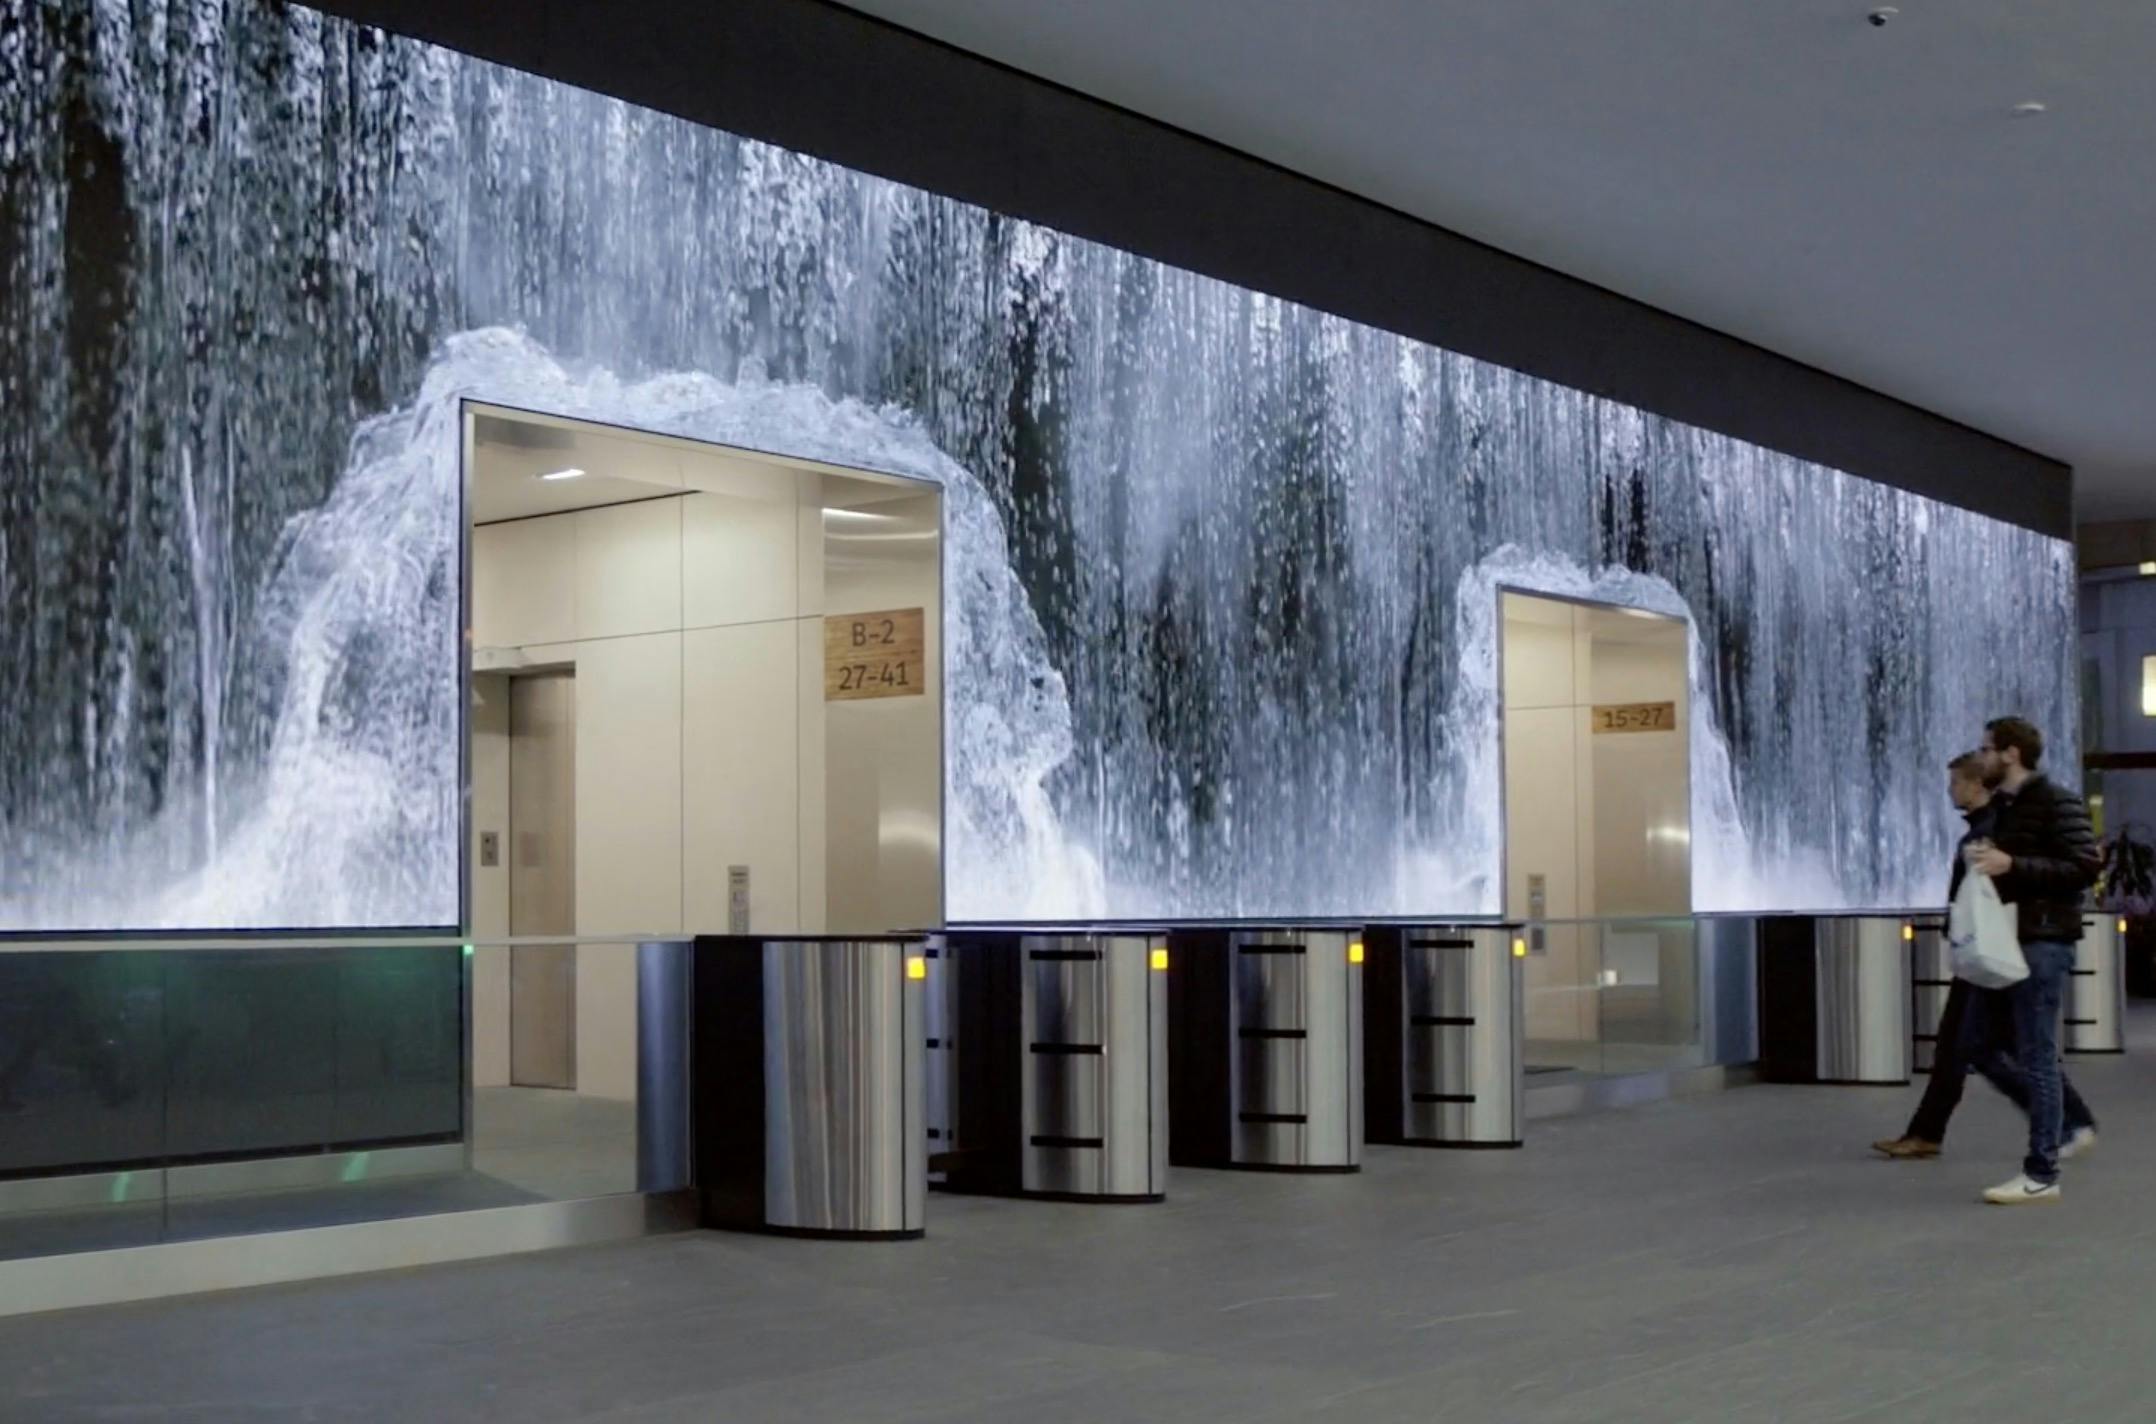 Check Out This Stunning 108 Feet Long Video Wall By Obscura